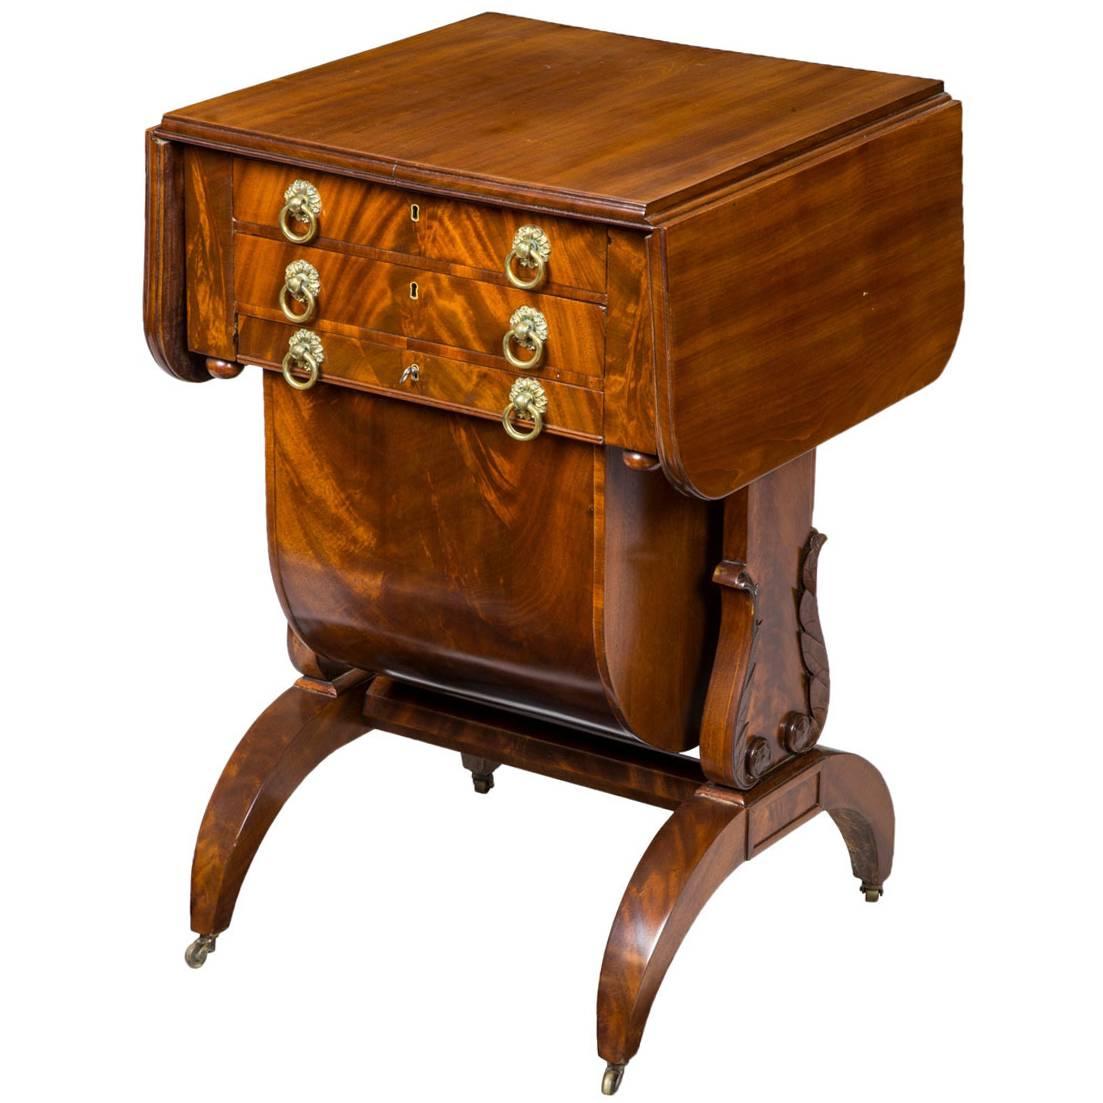 Classical Mahogany Work Table with Carved Lyre Supports, Boston, circa 1820